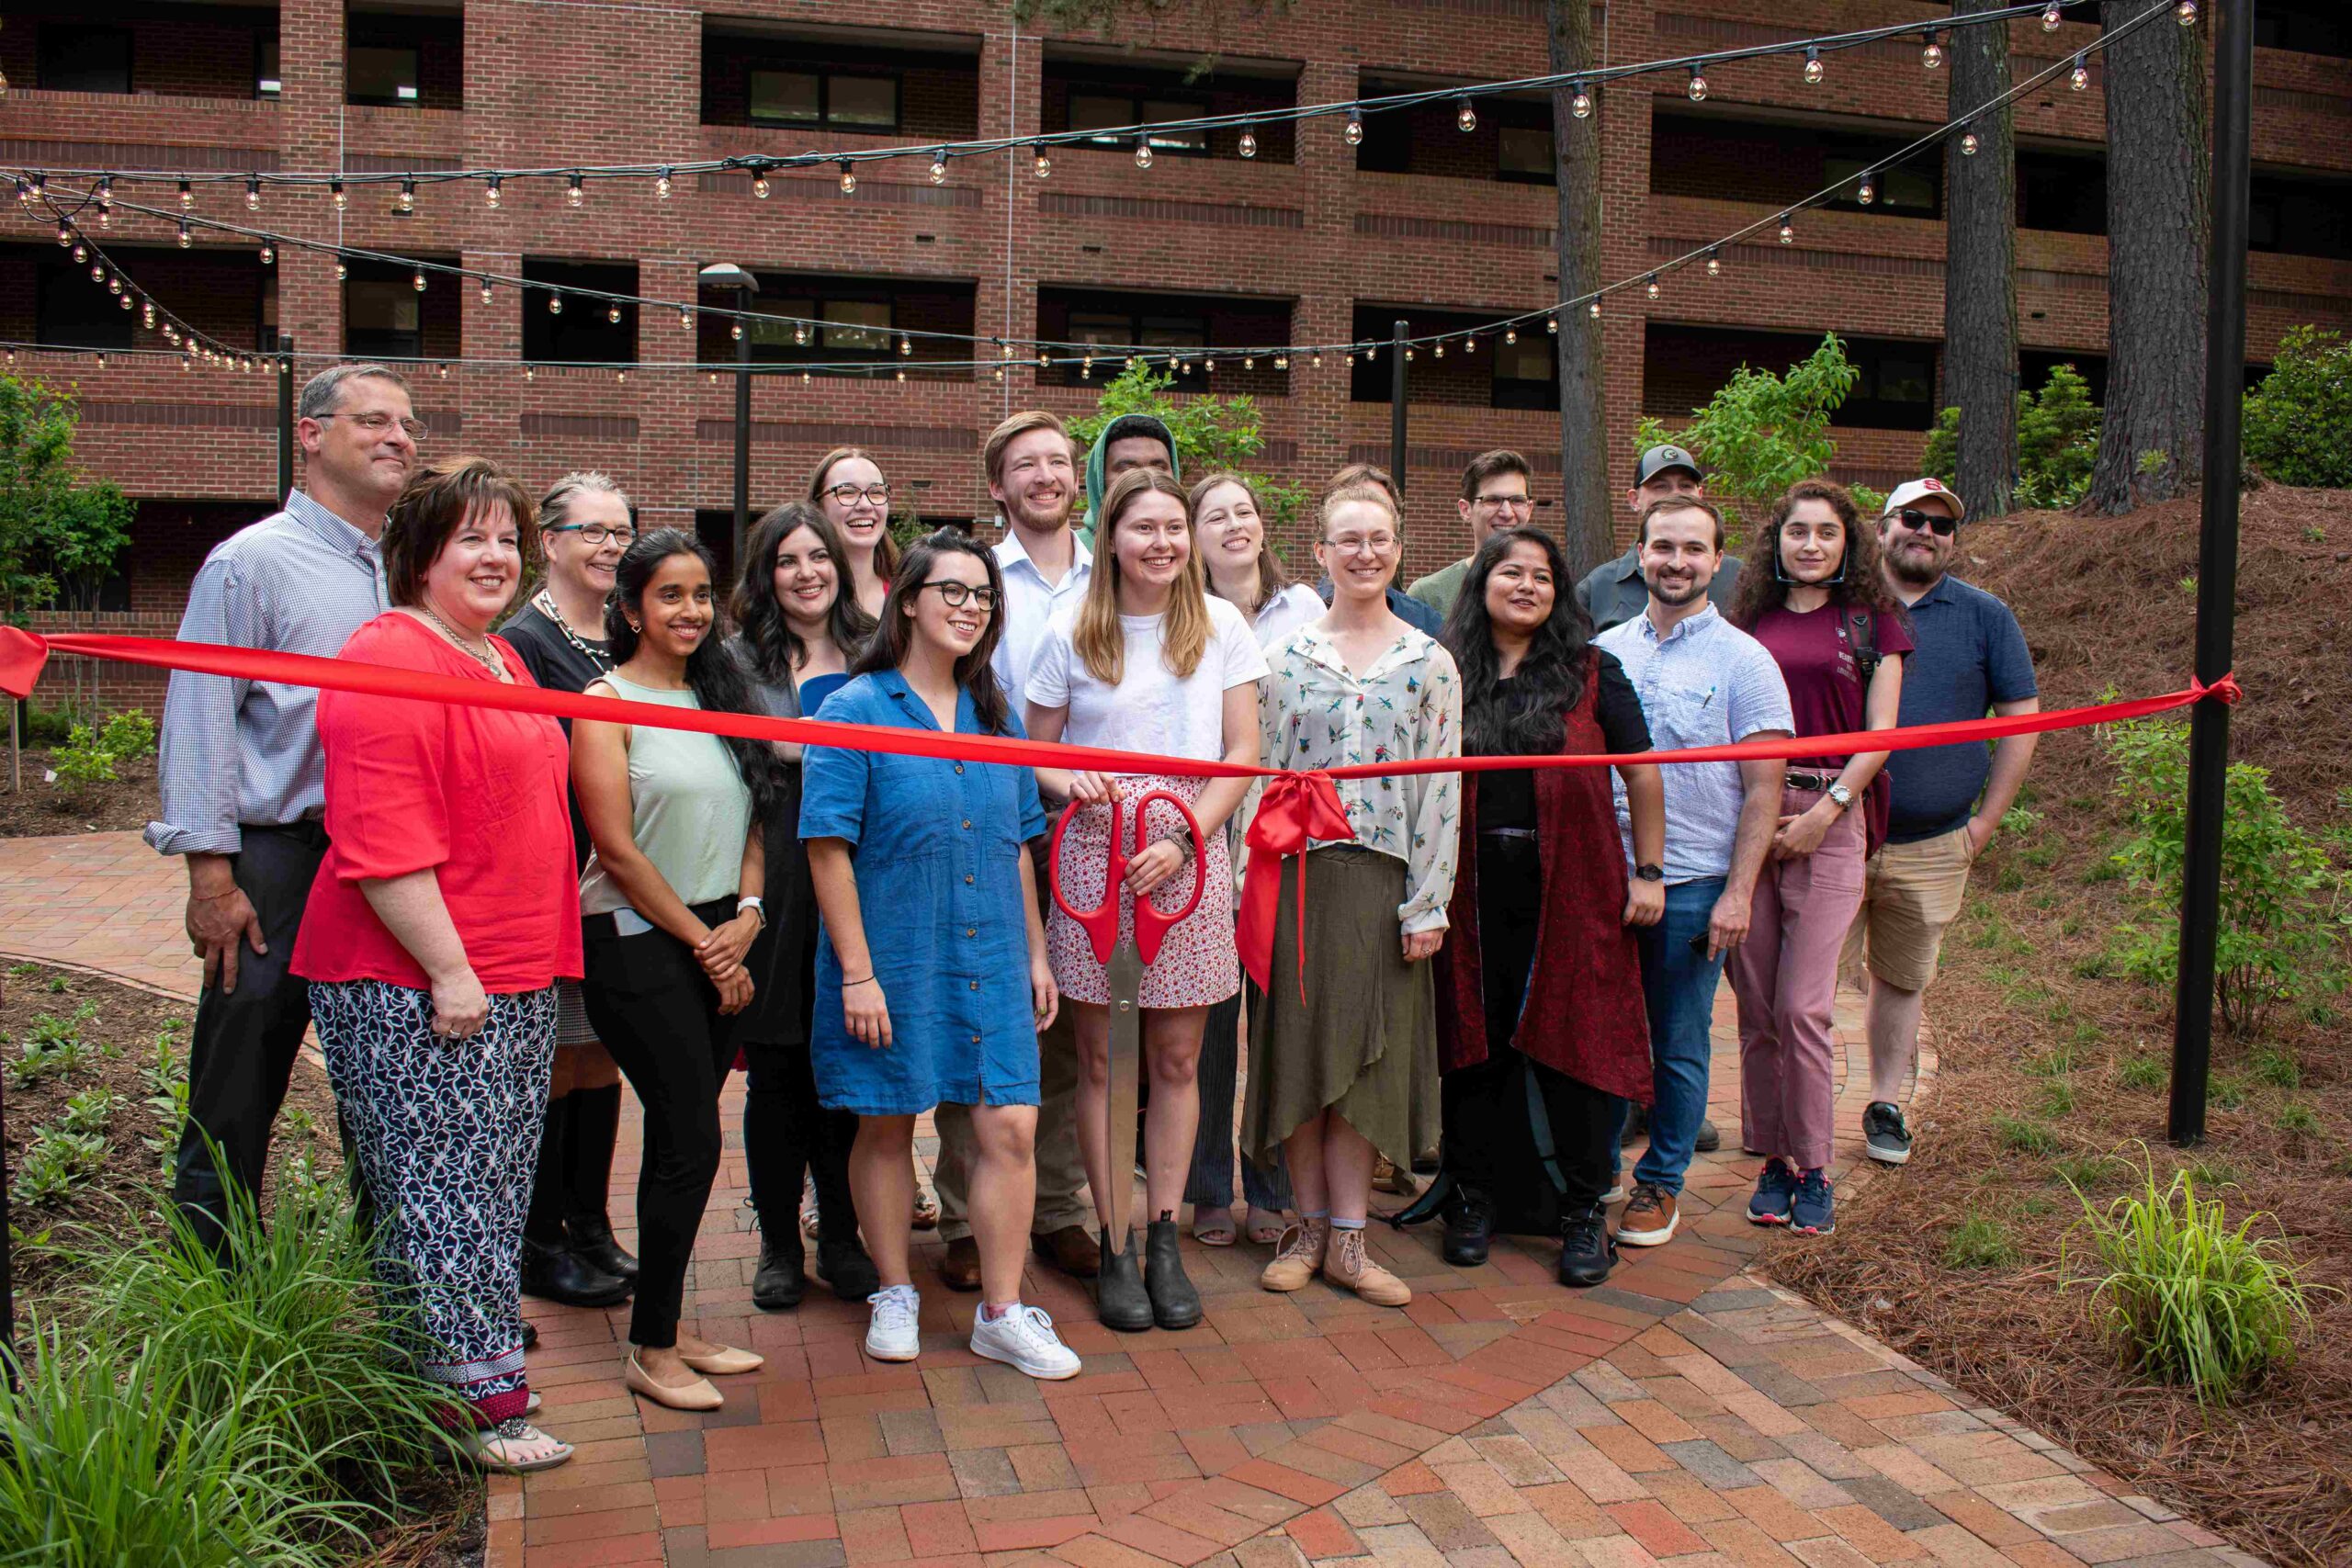 LAR 506 students, professors and community partners pose in front of the new Wood Hall redesigned area